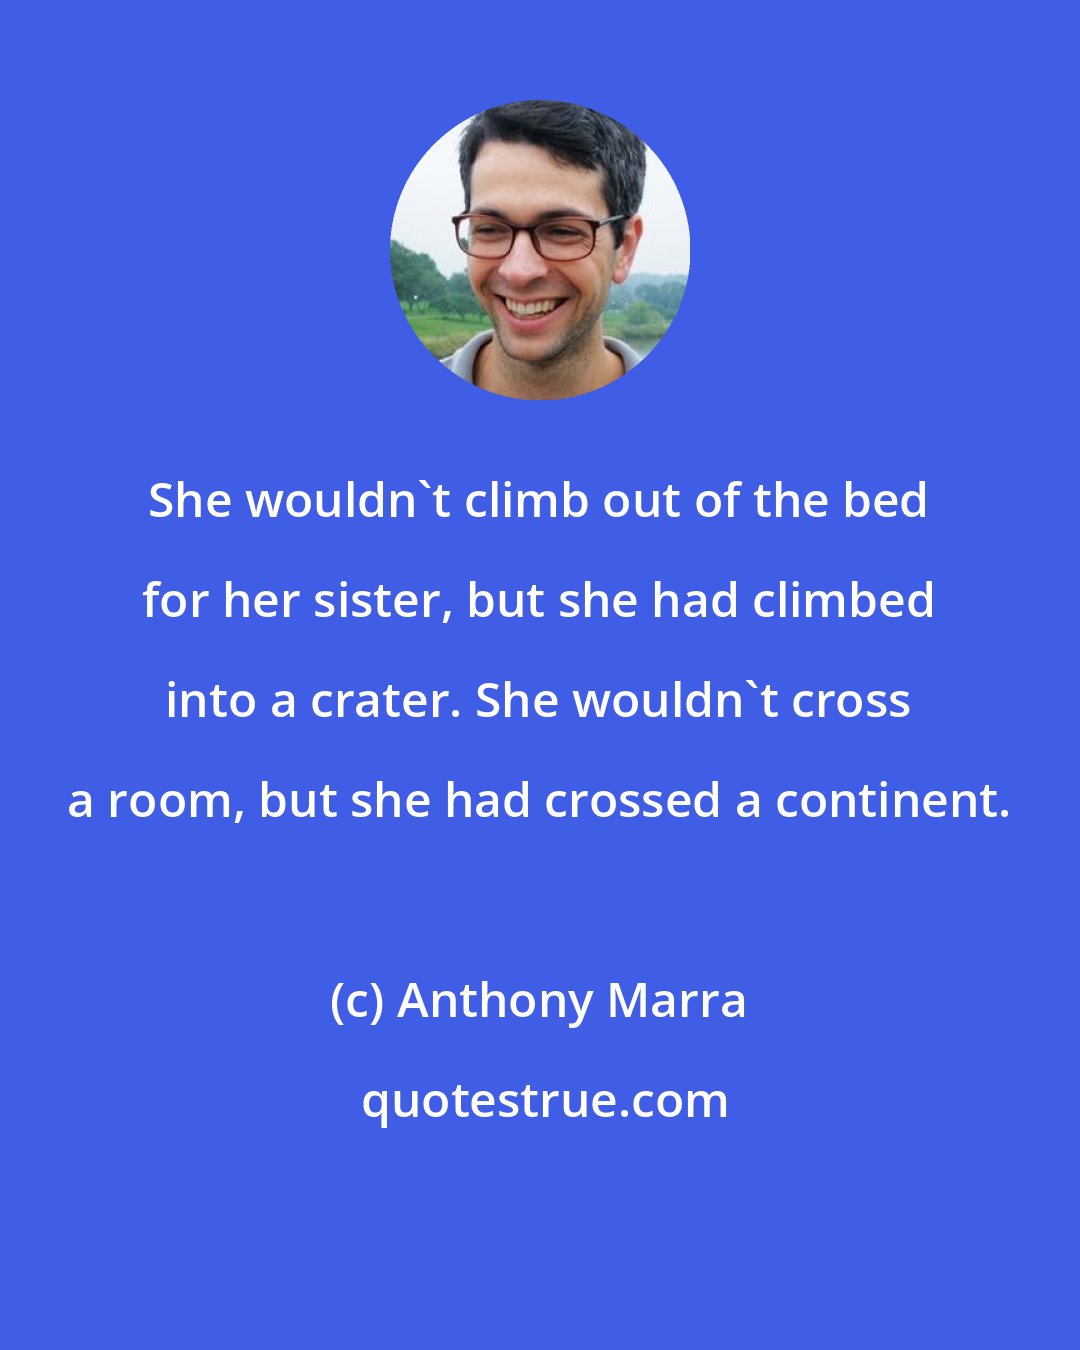 Anthony Marra: She wouldn't climb out of the bed for her sister, but she had climbed into a crater. She wouldn't cross a room, but she had crossed a continent.